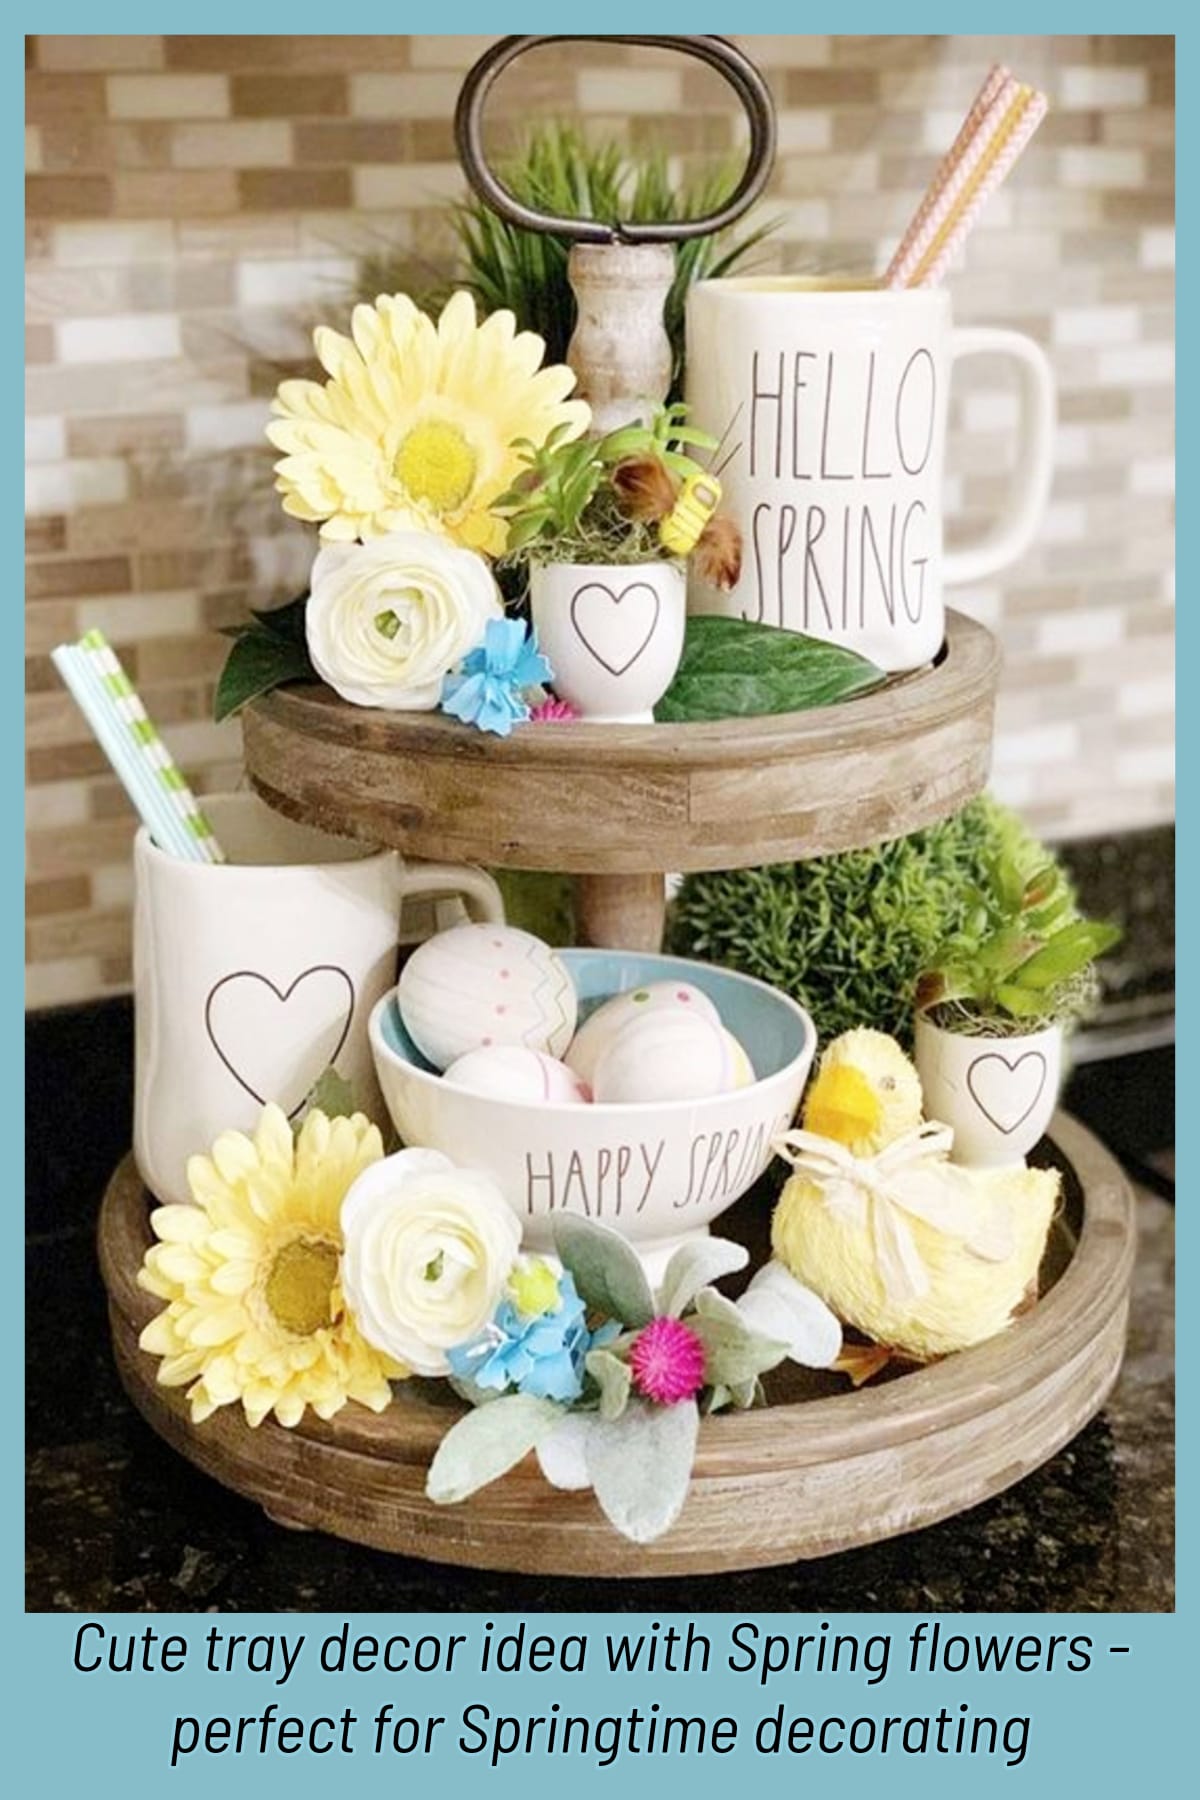 Spring decor ideas - wood tray Springtime decorations - fun DIY Spring decorating project to try